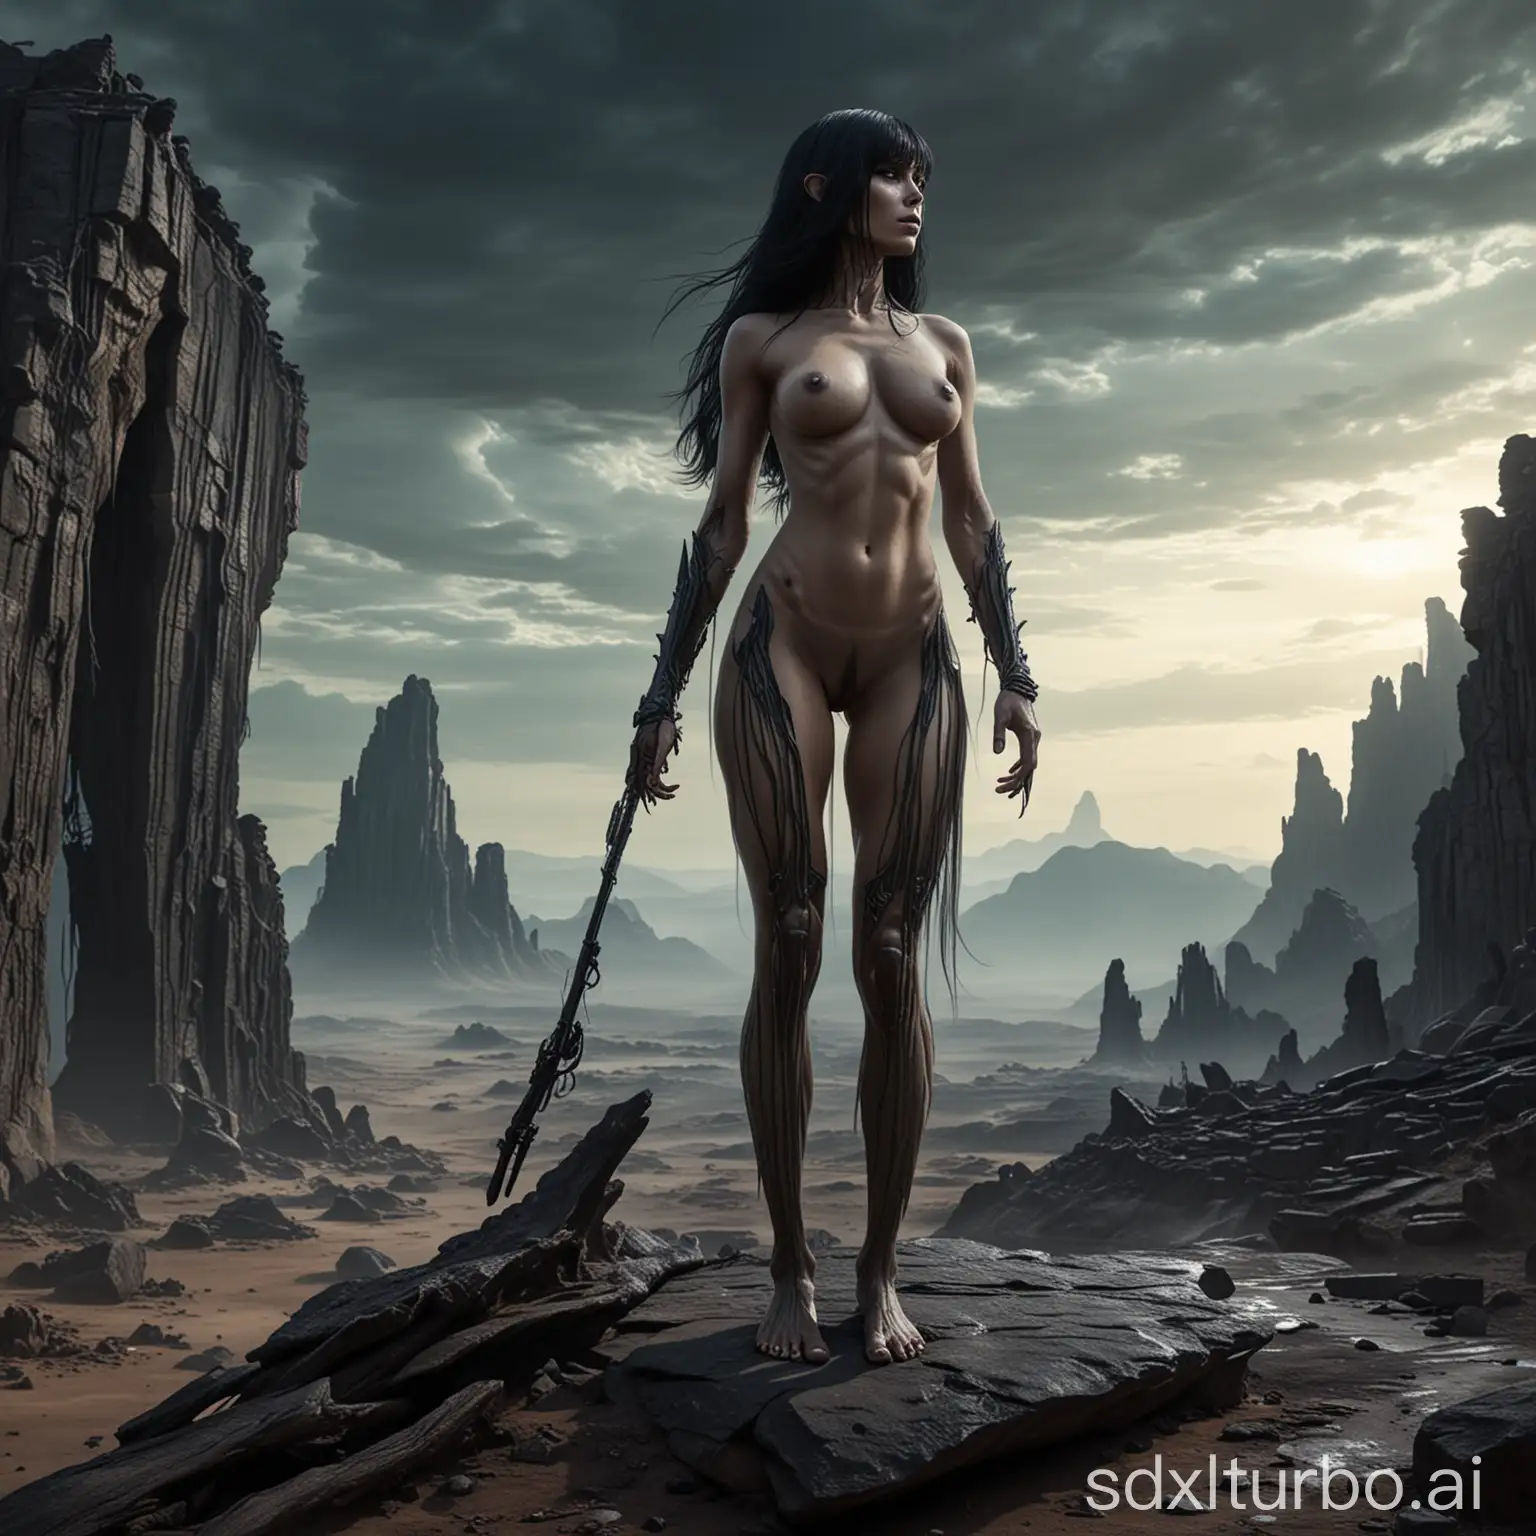 Powerful-Alien-Woman-with-Rifle-Standing-on-Dark-Planet-Rock-Ruins